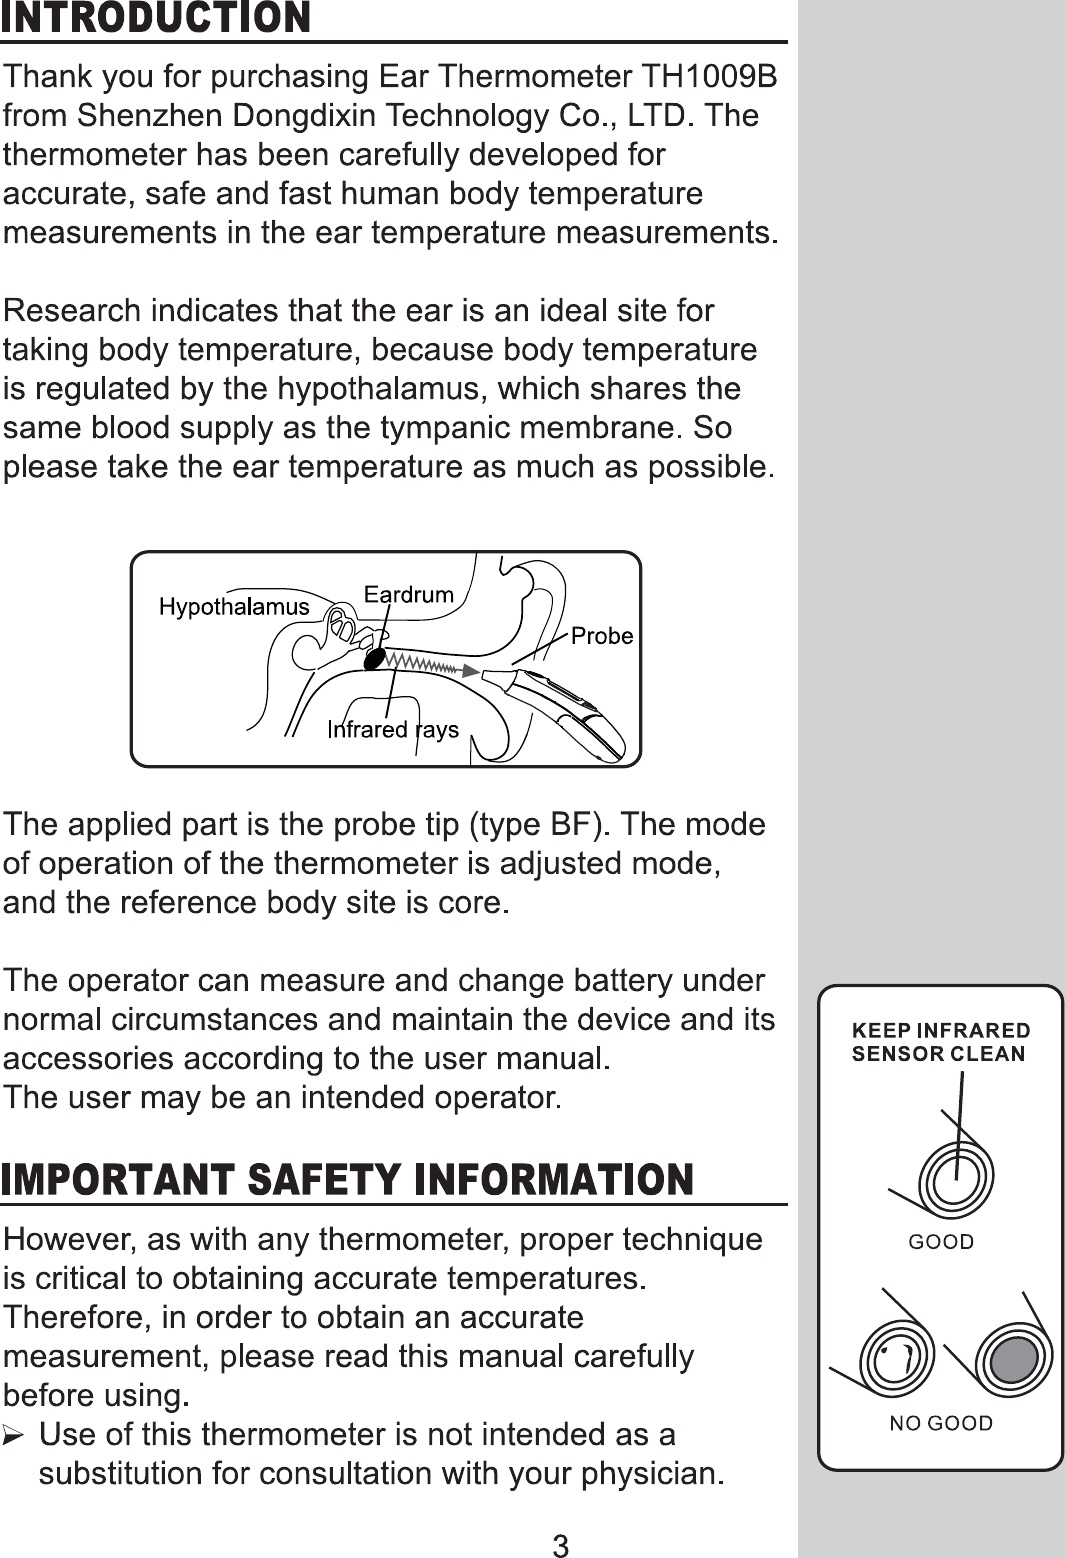 Page 3 of Dongdixin Technology BLUENRG-V10 Digital Ear Thermometer User Manual